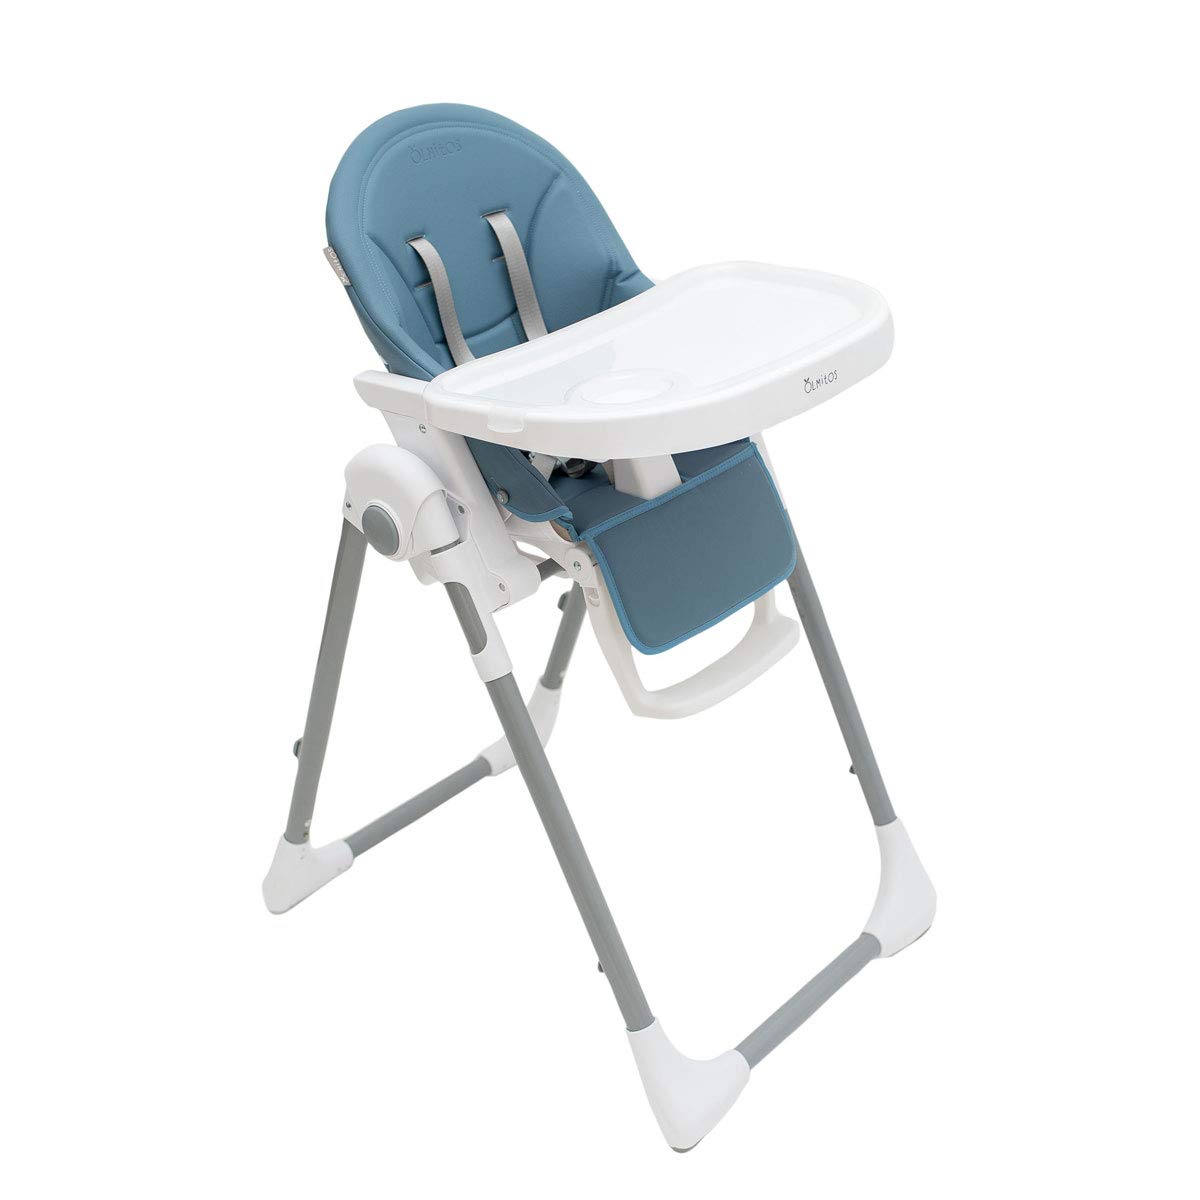 Olmitos 5110 – Highchairs